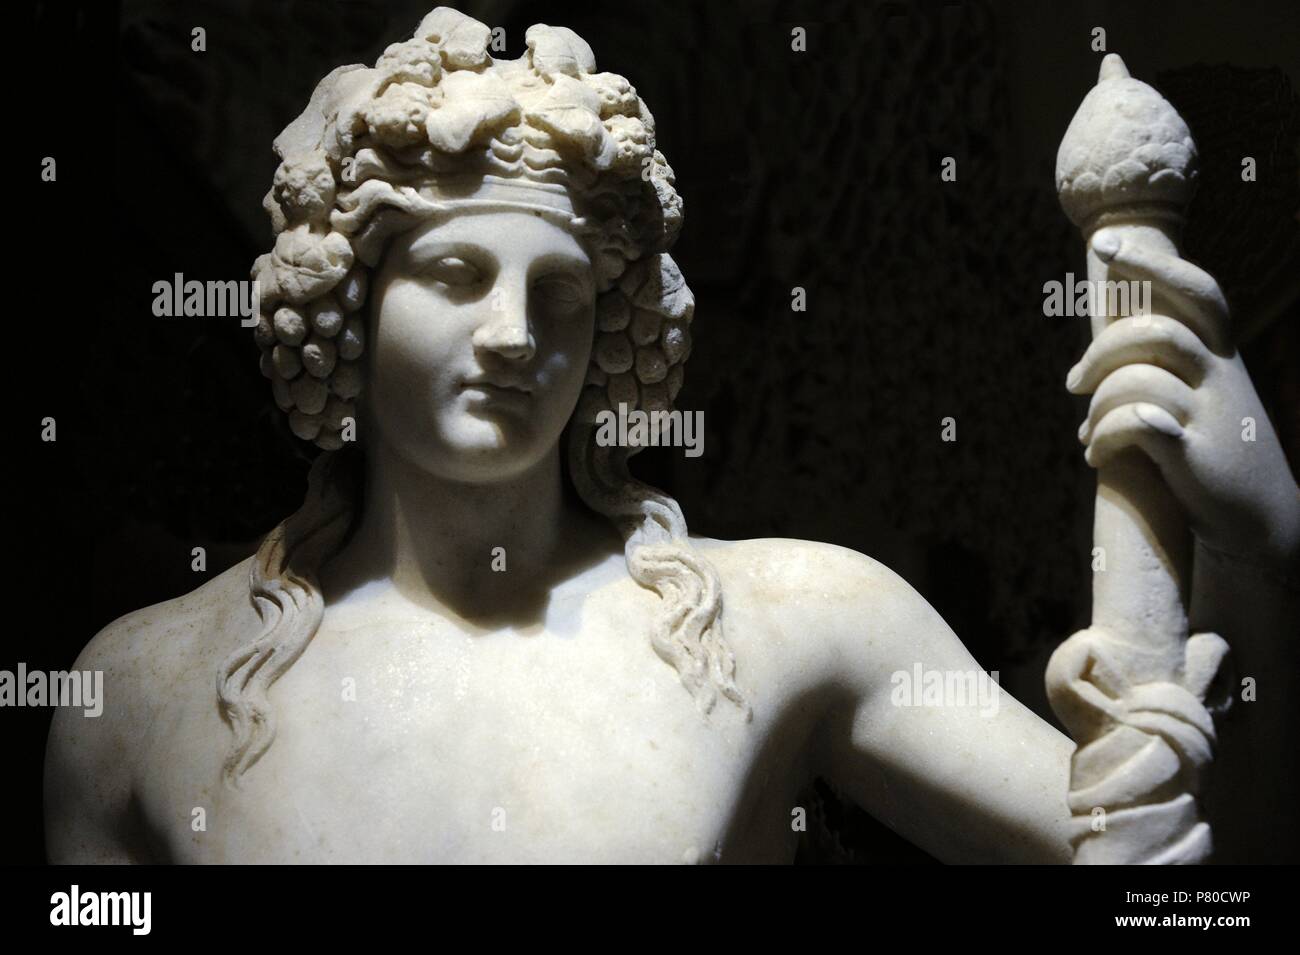 Statue of Dionysus, God of Wine, with crown of grape clusters. Detail. 1st century AD. Marble. National Archaeological Museum. Naples. Italy. Stock Photo